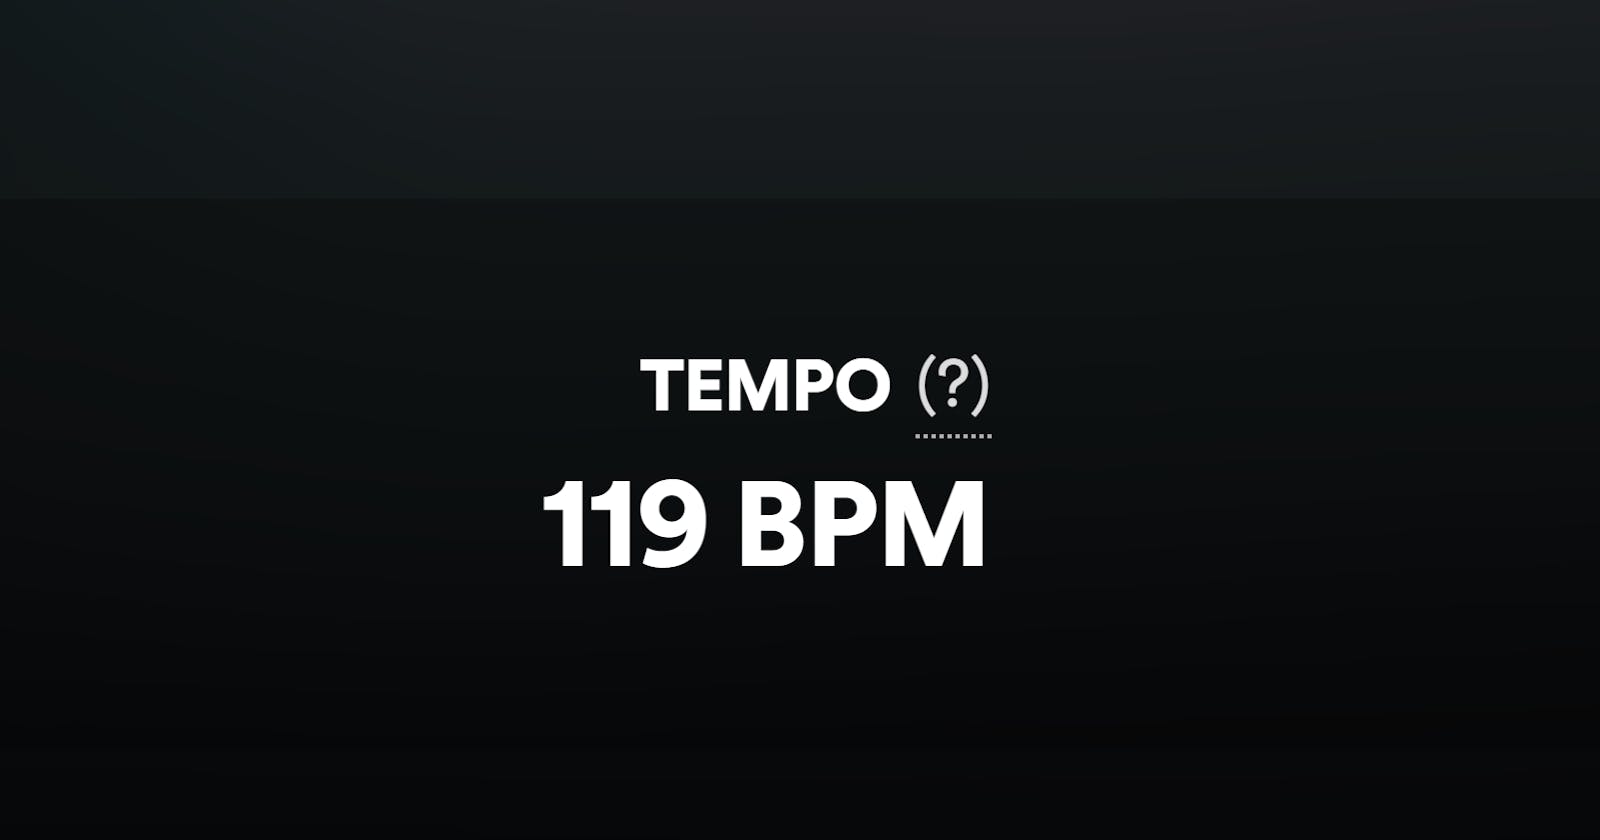 How do you find the BPM of a song on Spotify?